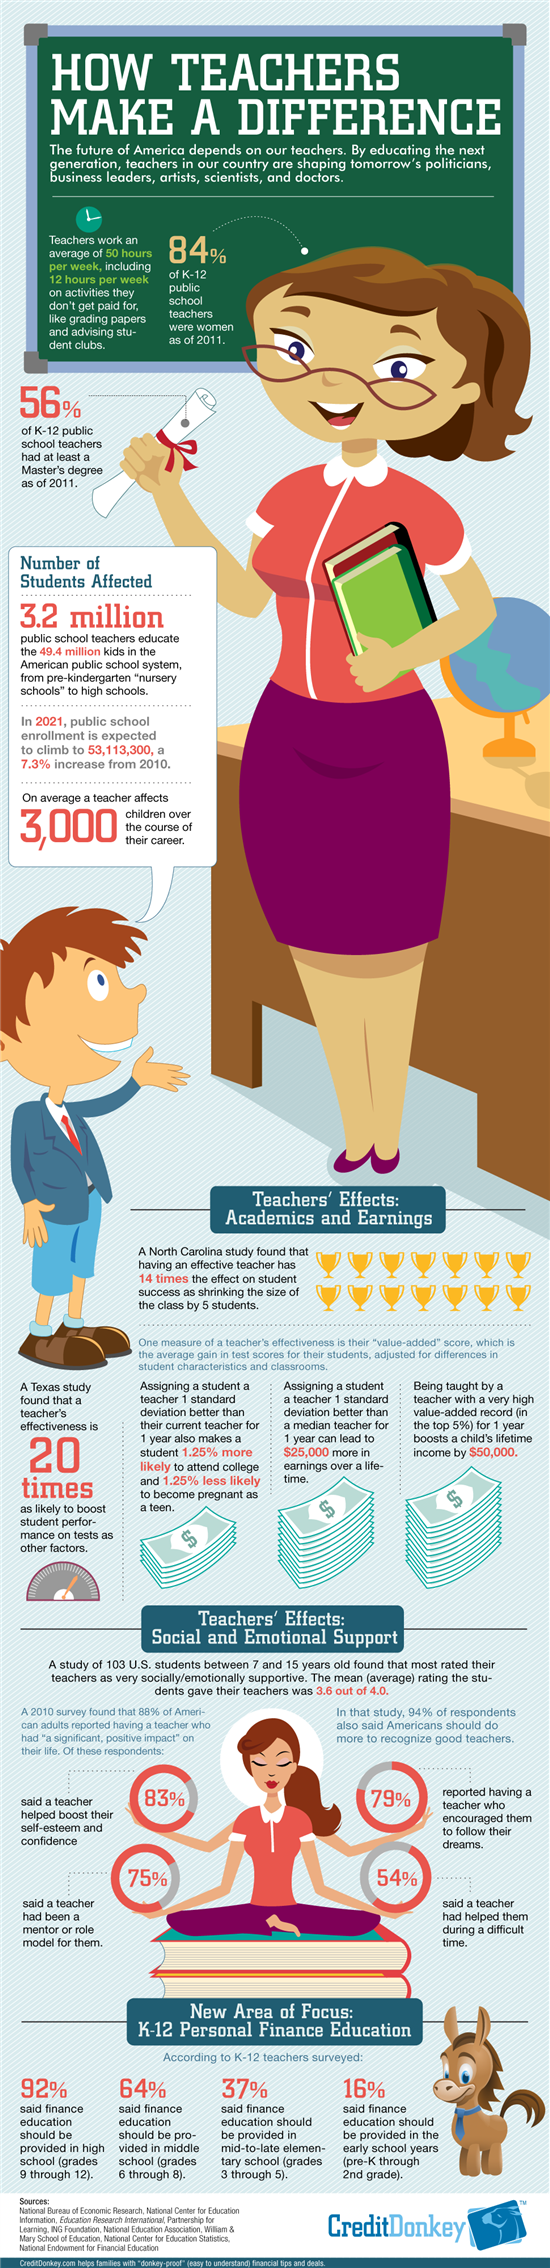 Infographic: How Teachers Make a Difference